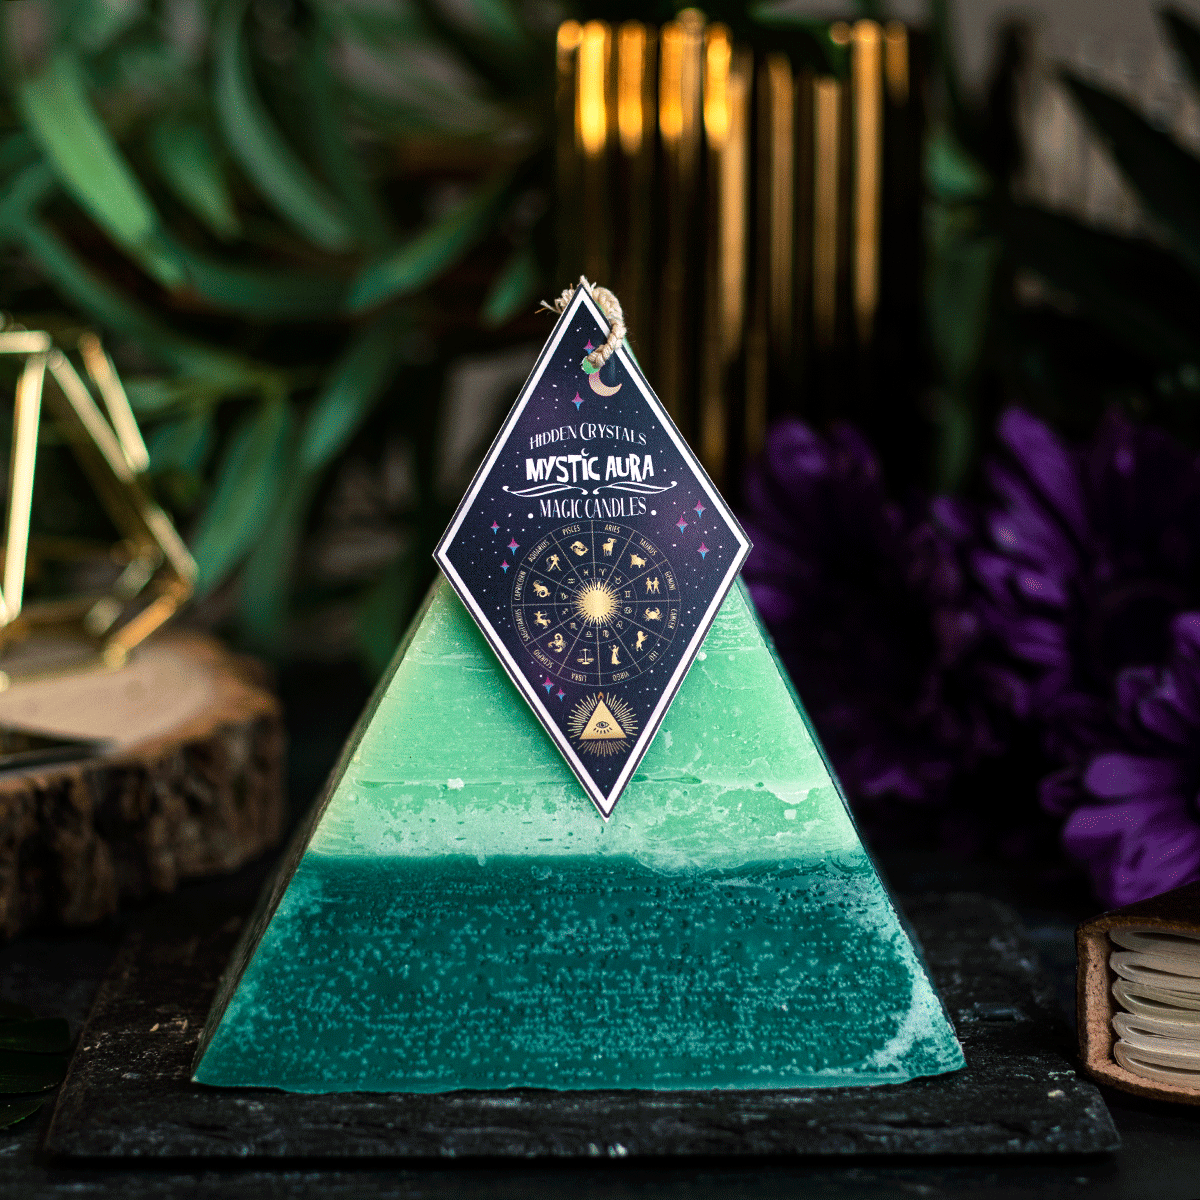 Cancer Zodiac Pyramid Candle With Hidden Crystals by Mystic Aura Candles, Light Green / Dark Green